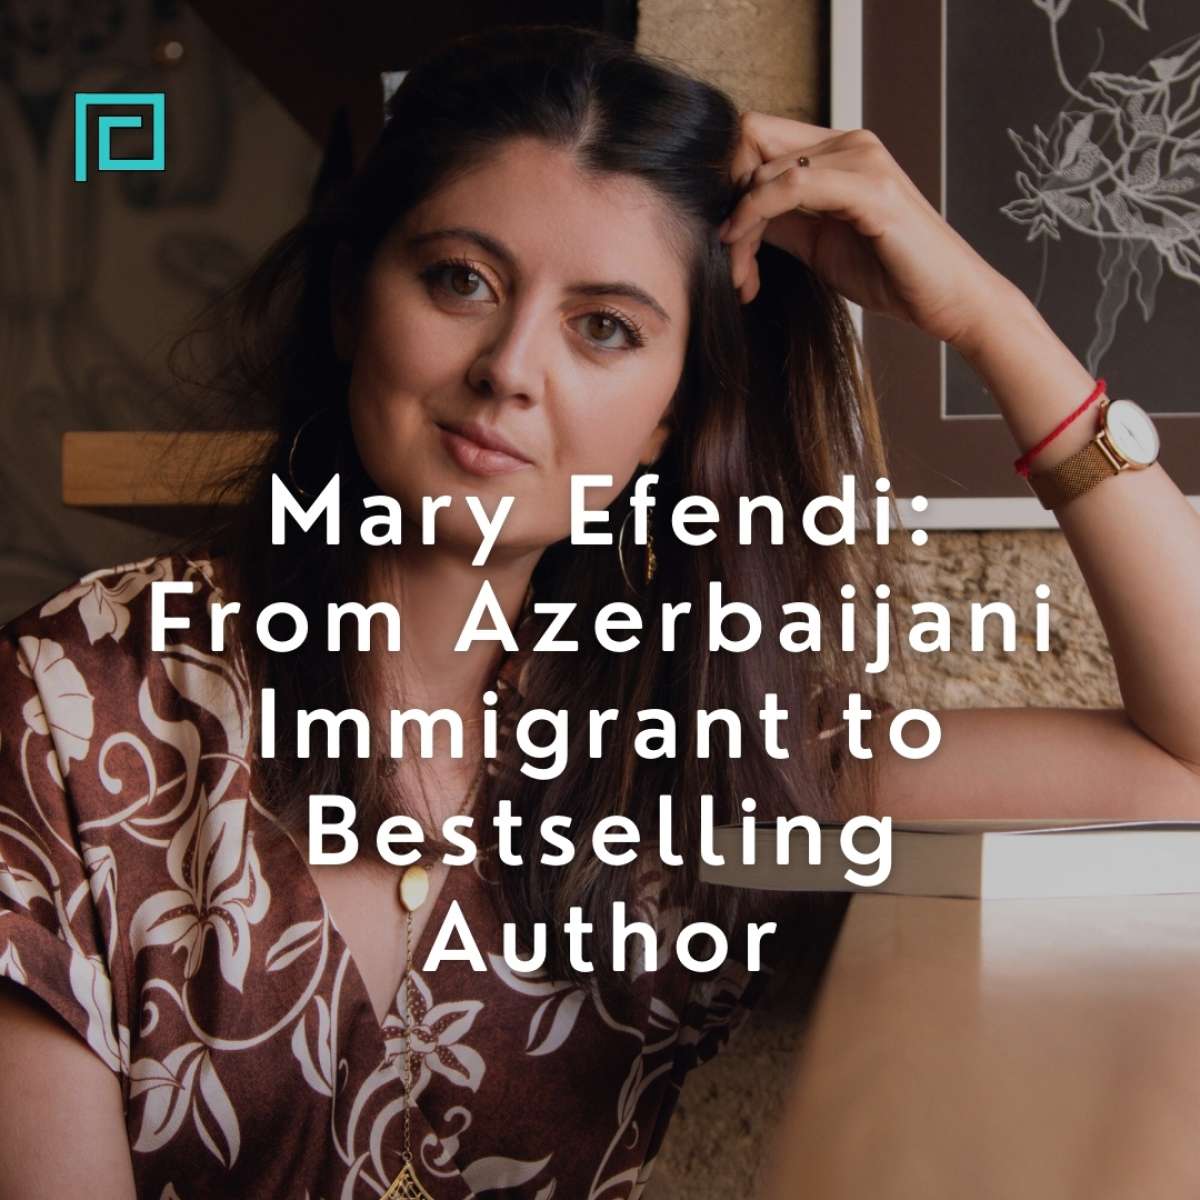 Mary Efendi: From Azerbaijani Immigrant to Bestselling Author